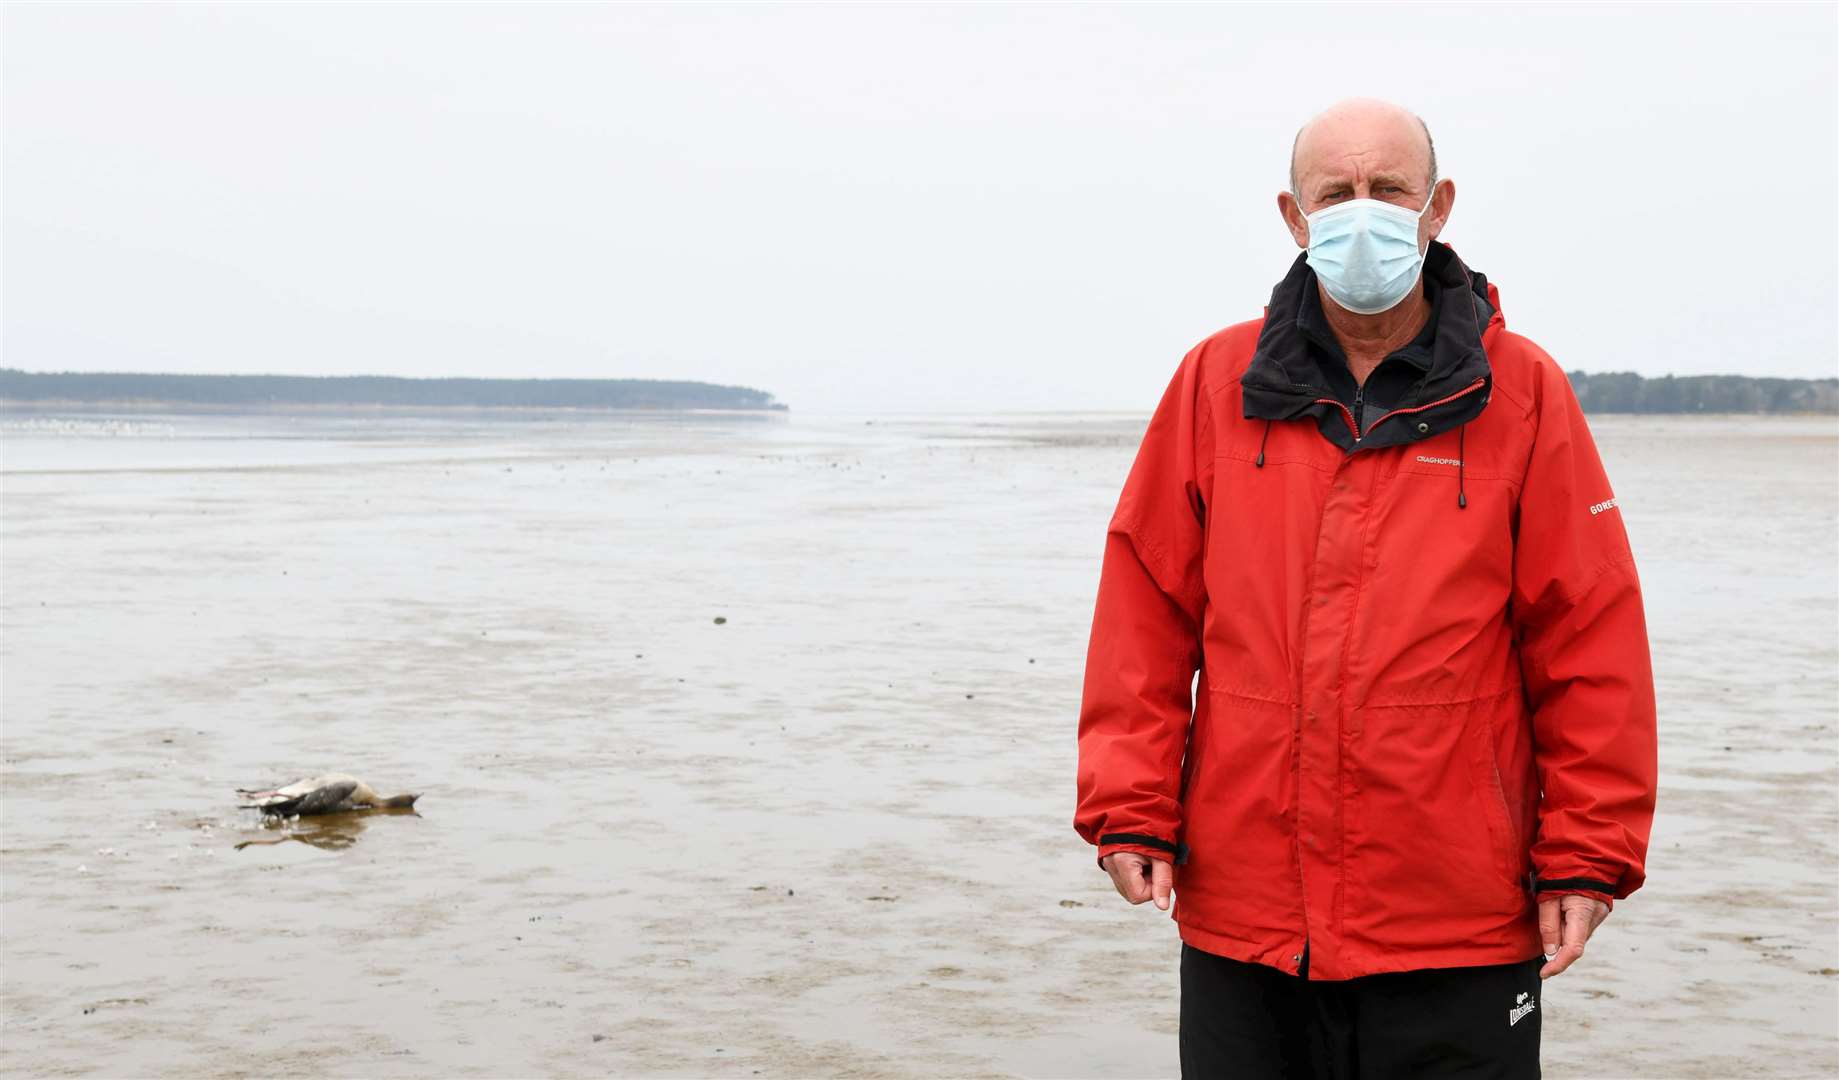 Wildlife enthusiast Spencer Julian at Findhorn Bay where there have been scores of dead geese found.